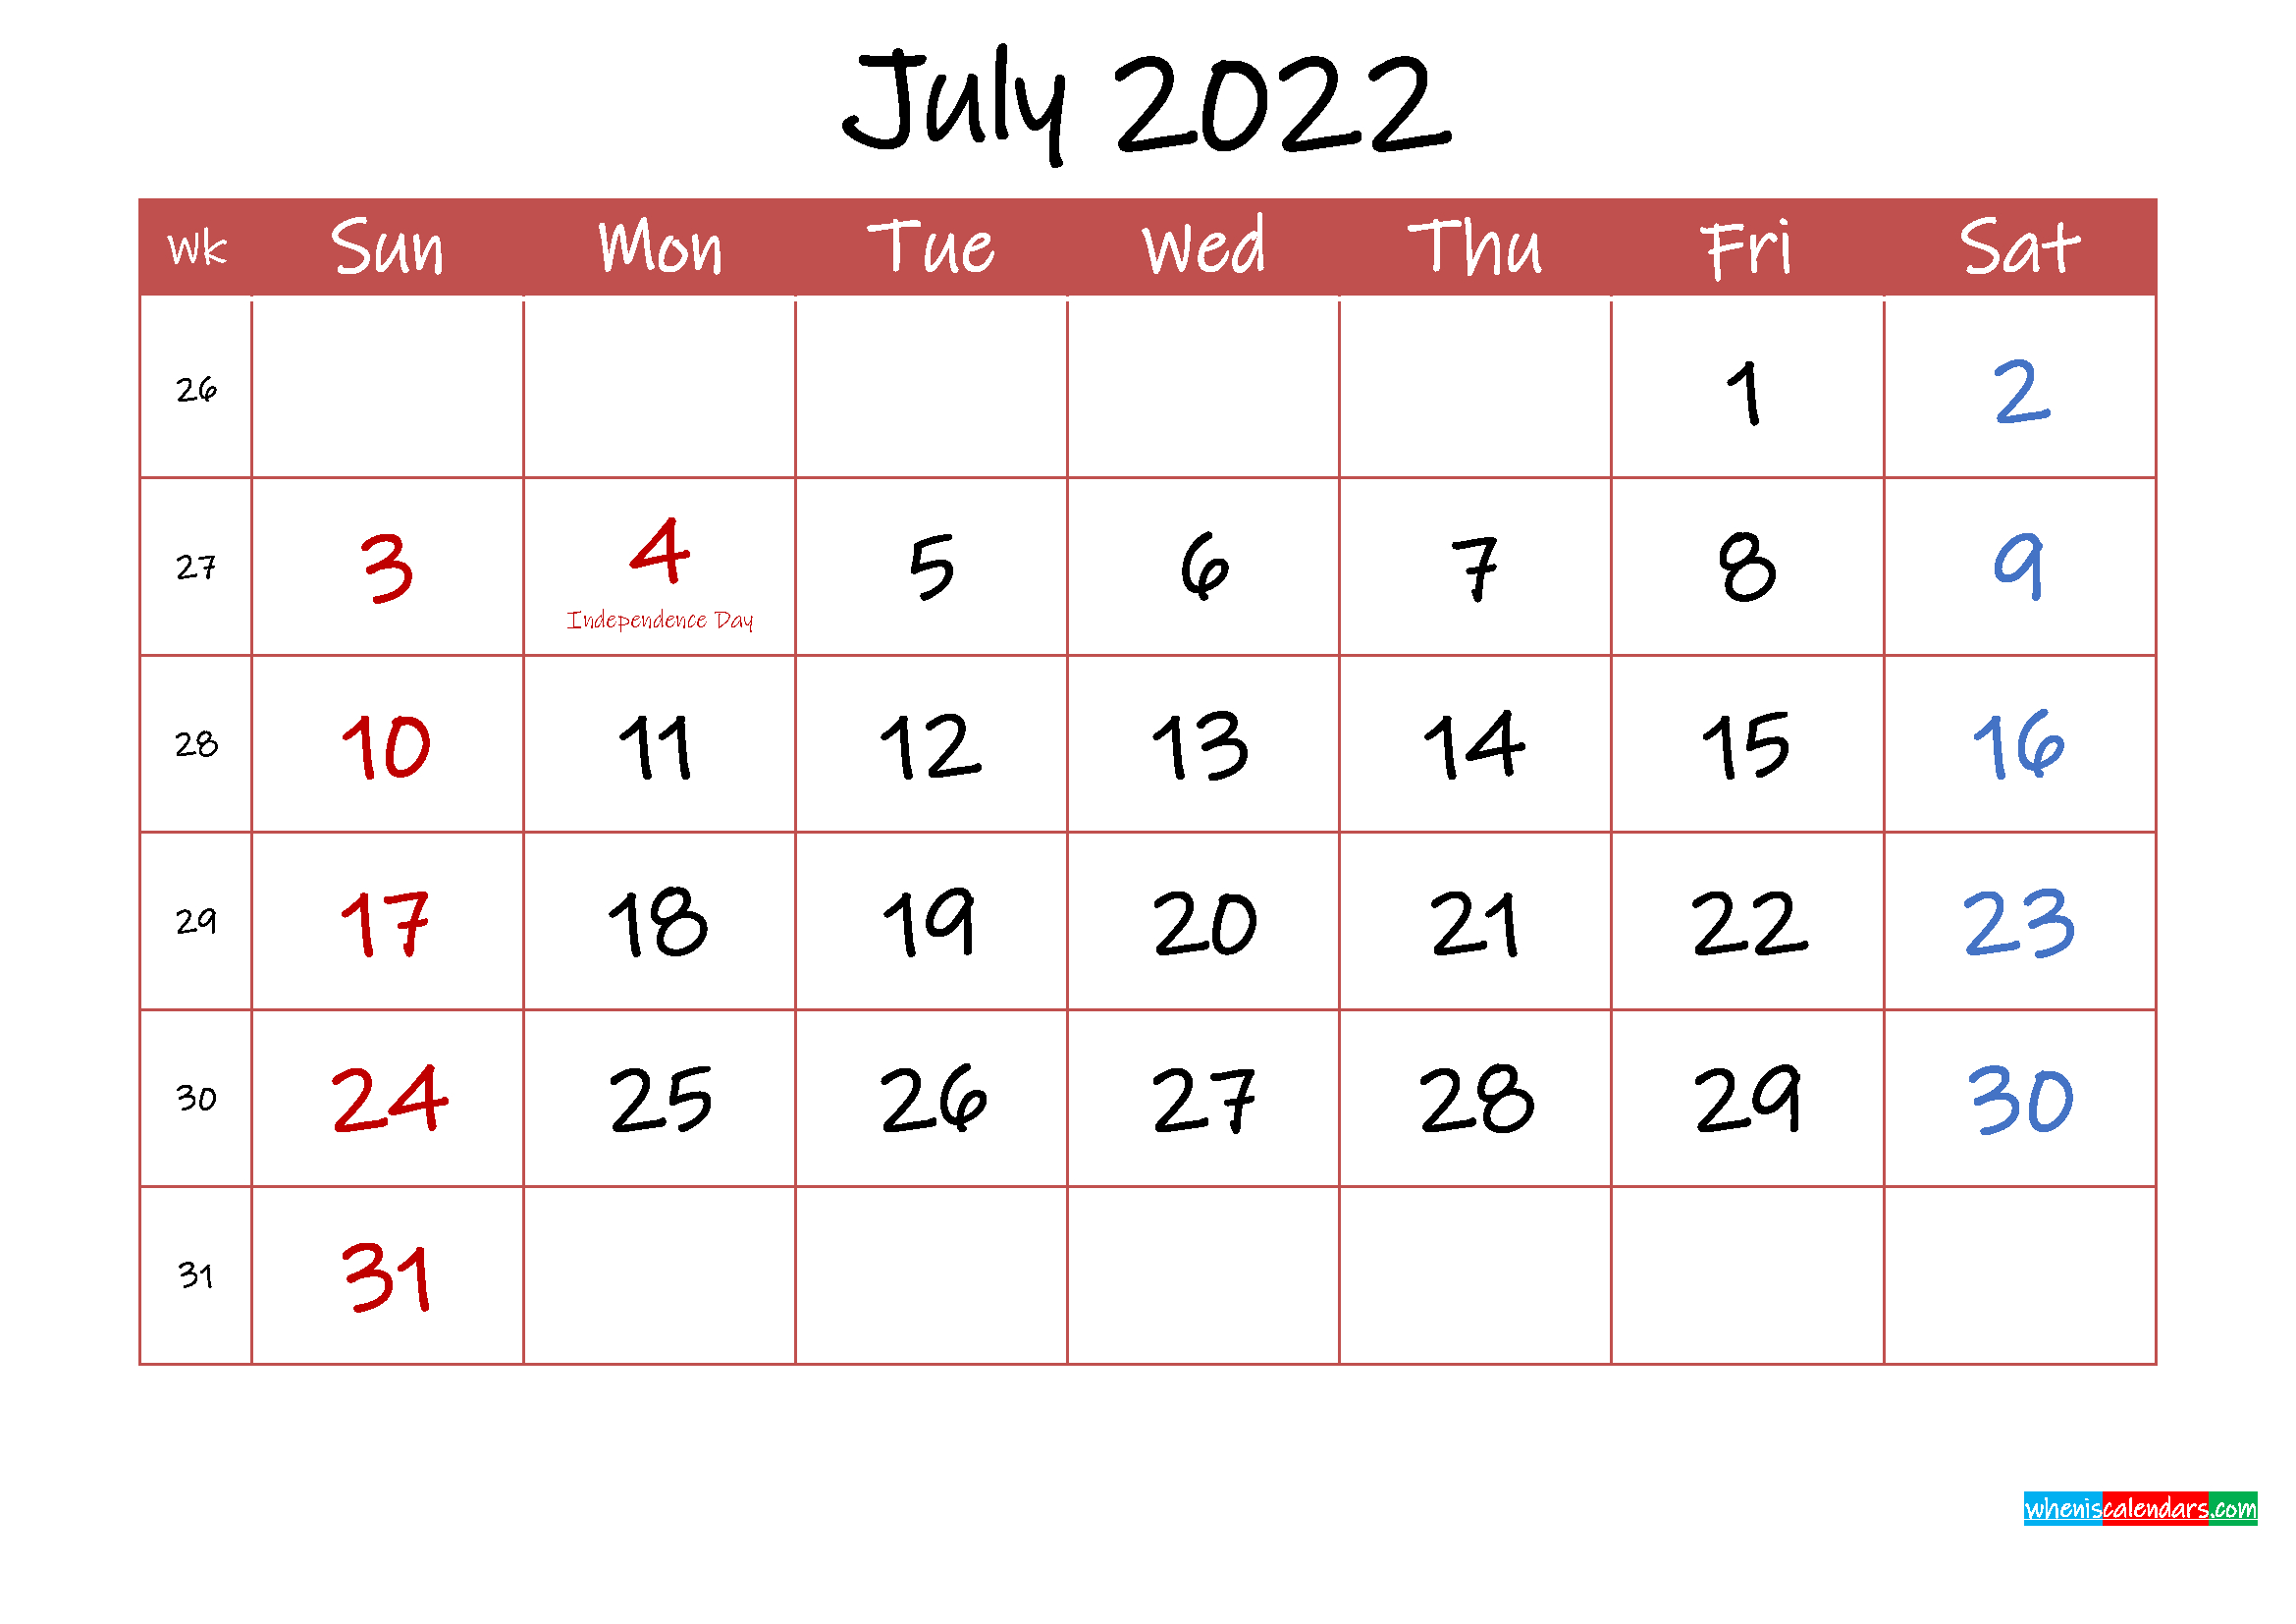 Printable July 2022 Calendar With Holidays - Template Ink22M31